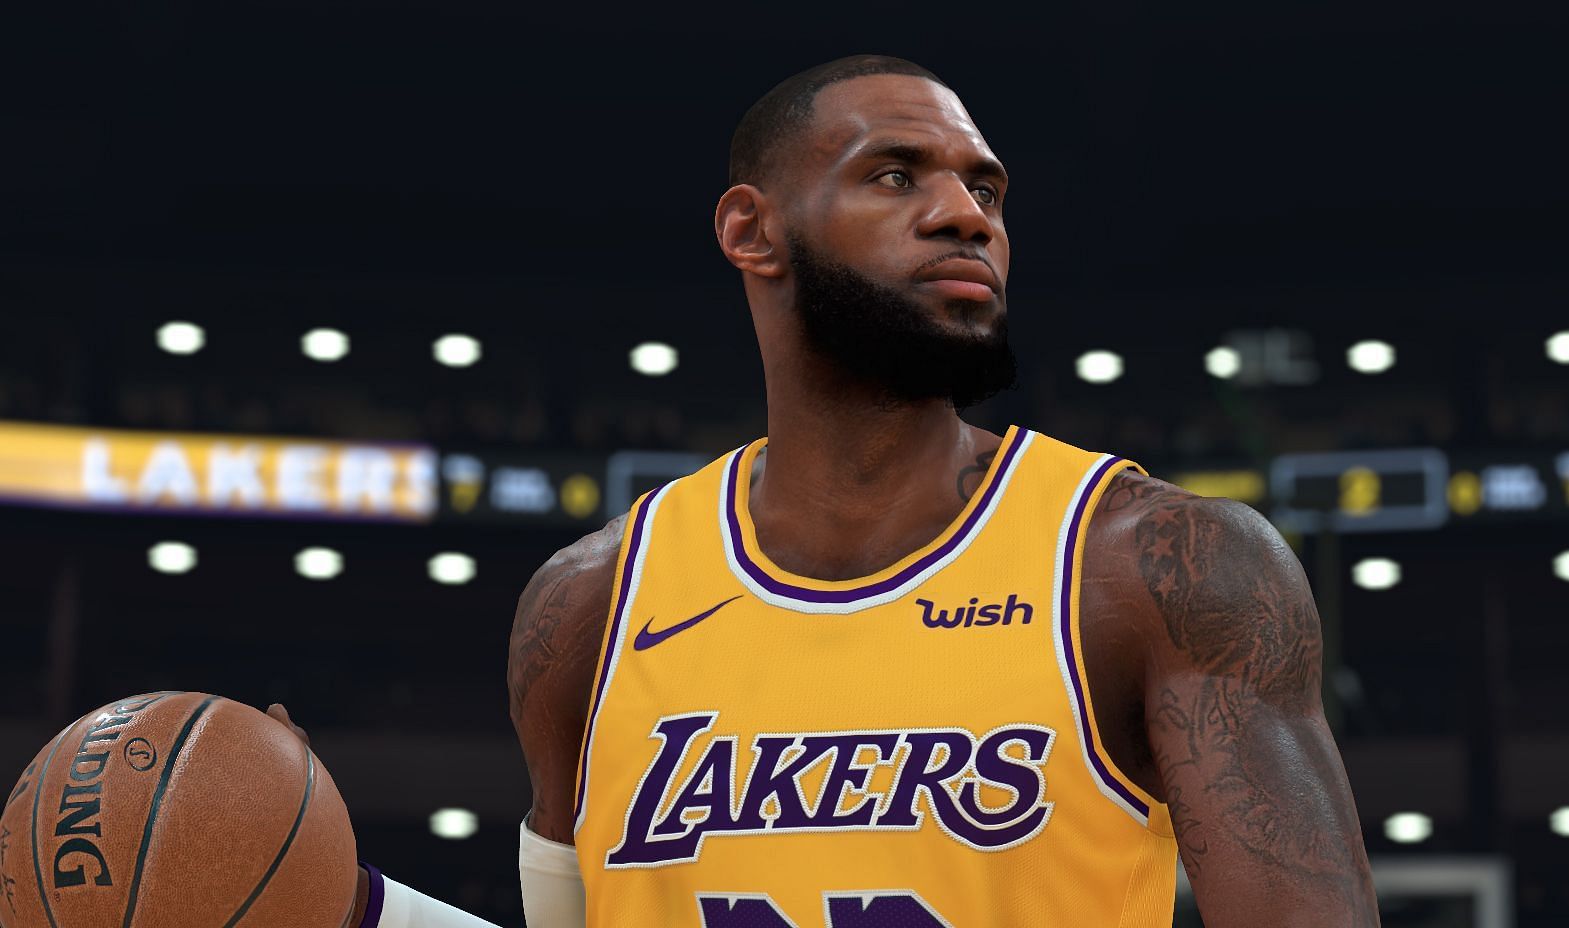 LeBron James of the LA Lakers as seen in NBA 2K20